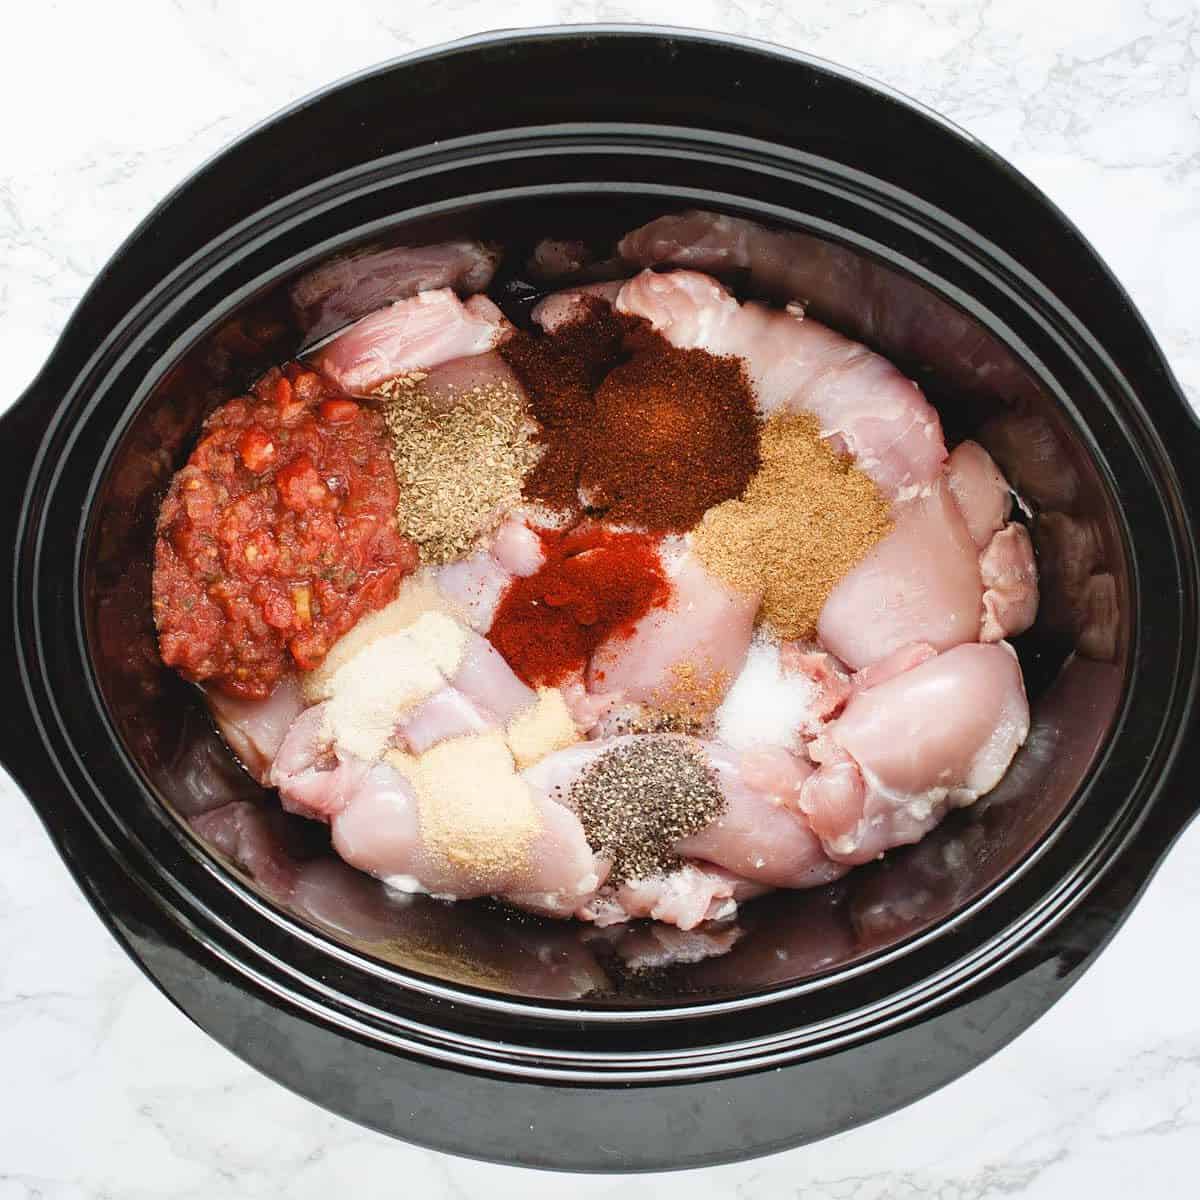 chicken, salsa and spices in a crockpot